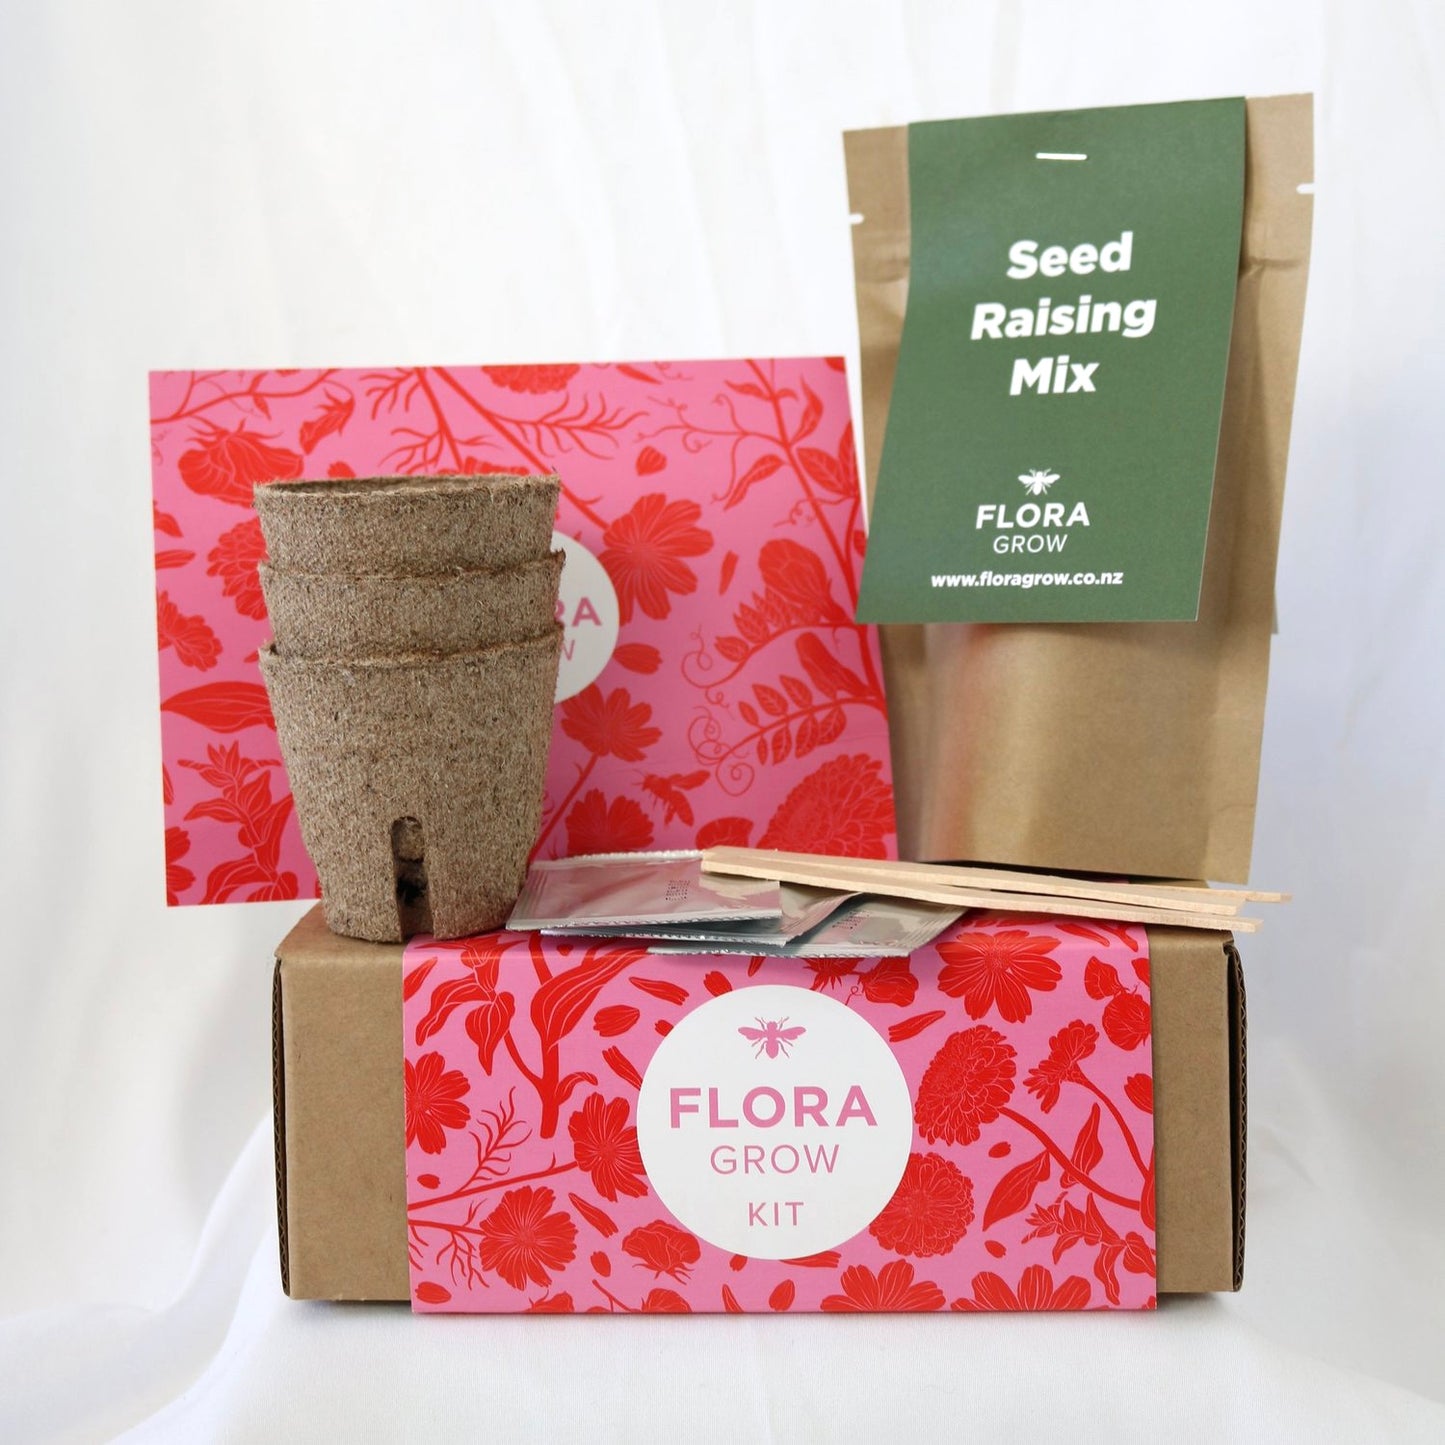 The Cut Flower Seed Growing Kit